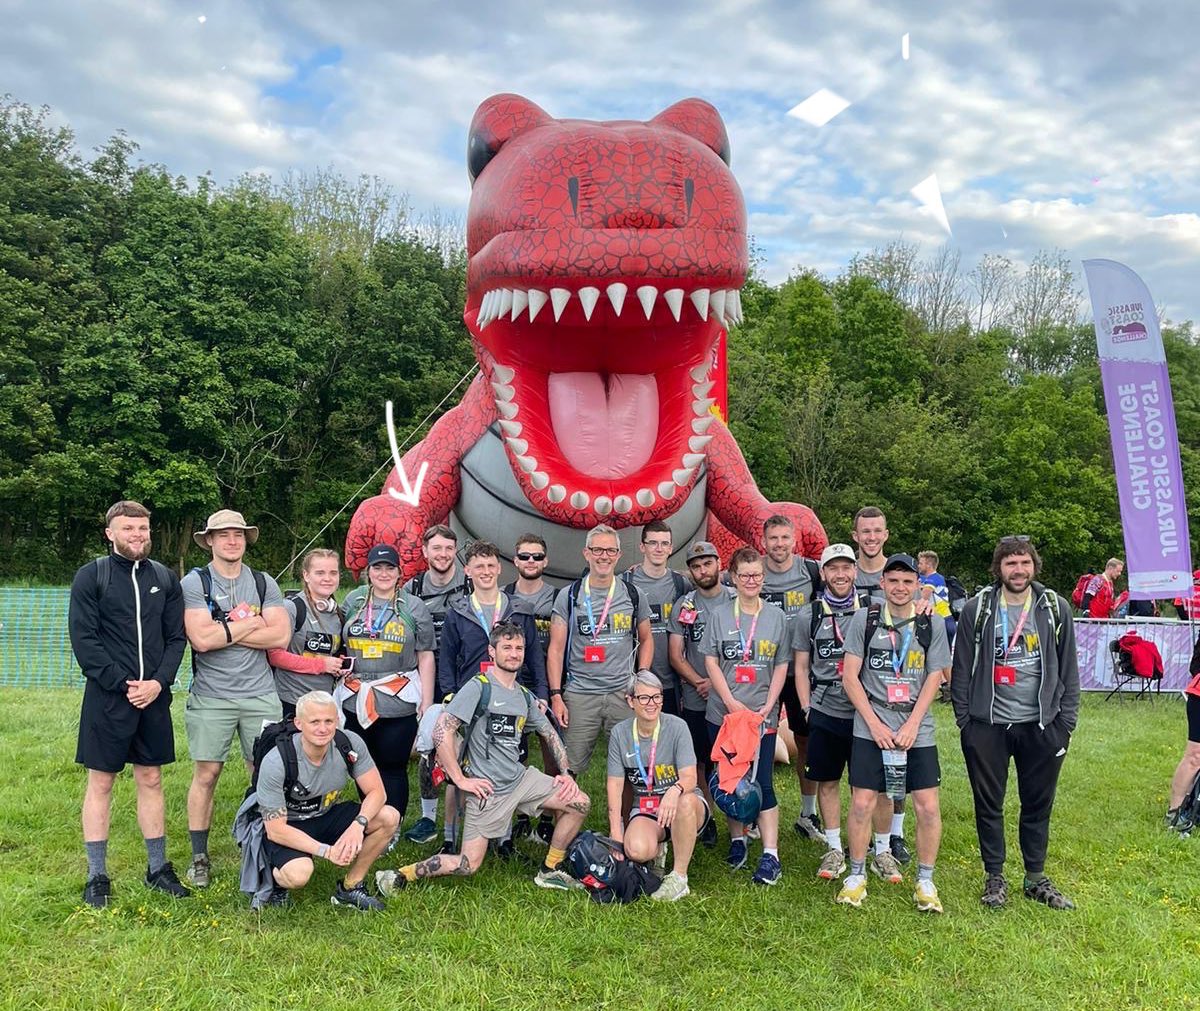 Men’s mental health so important. Very Proud of Finn & @MrBarbers team - Jurassic coast ultra challenge 100km in 24 hours for @BeThe12thMan - Legends. @theJeremyVine remember this mountaineer quote: “Mind you make it.” @UltraChallenges Go safely folks. justgiving.com/crowdfunding/m…